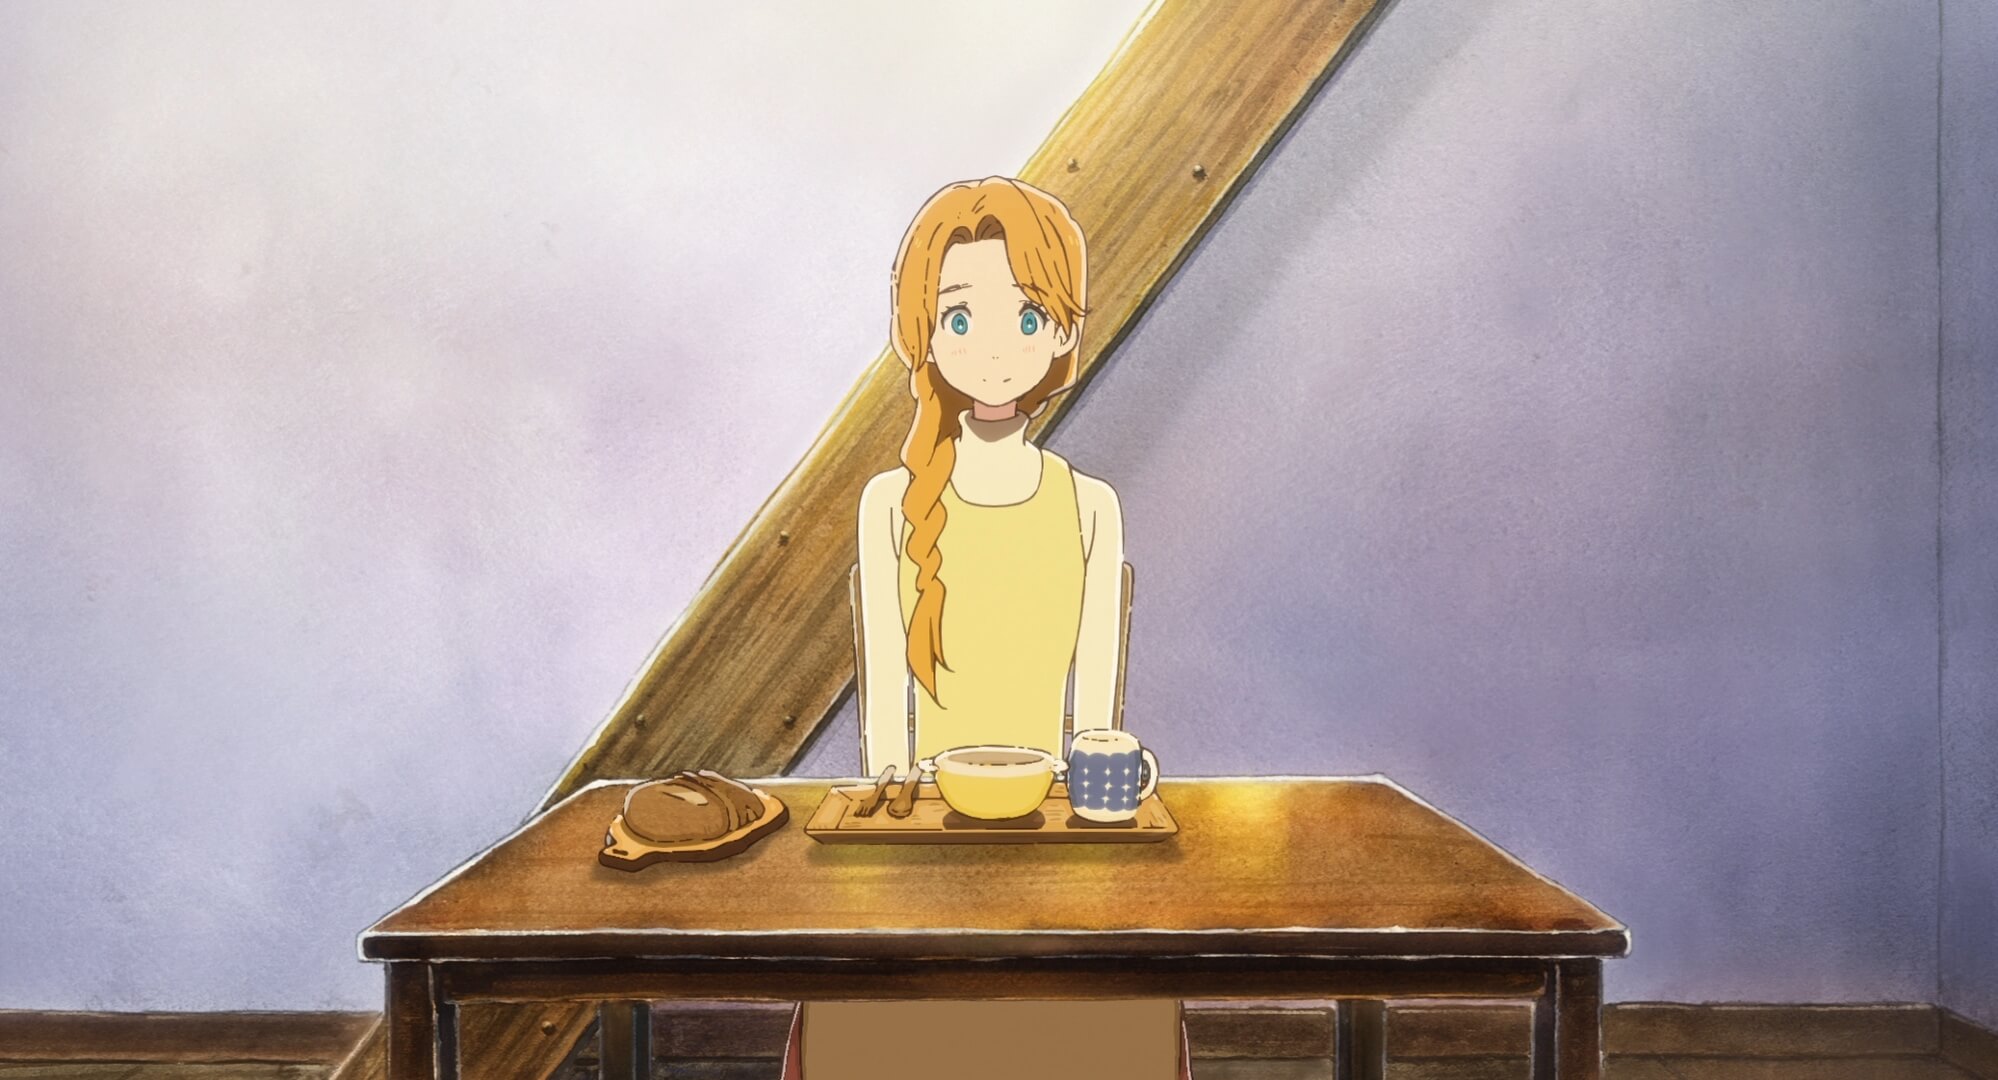 A screenshot of a girl sitting at a wooden table set for eating